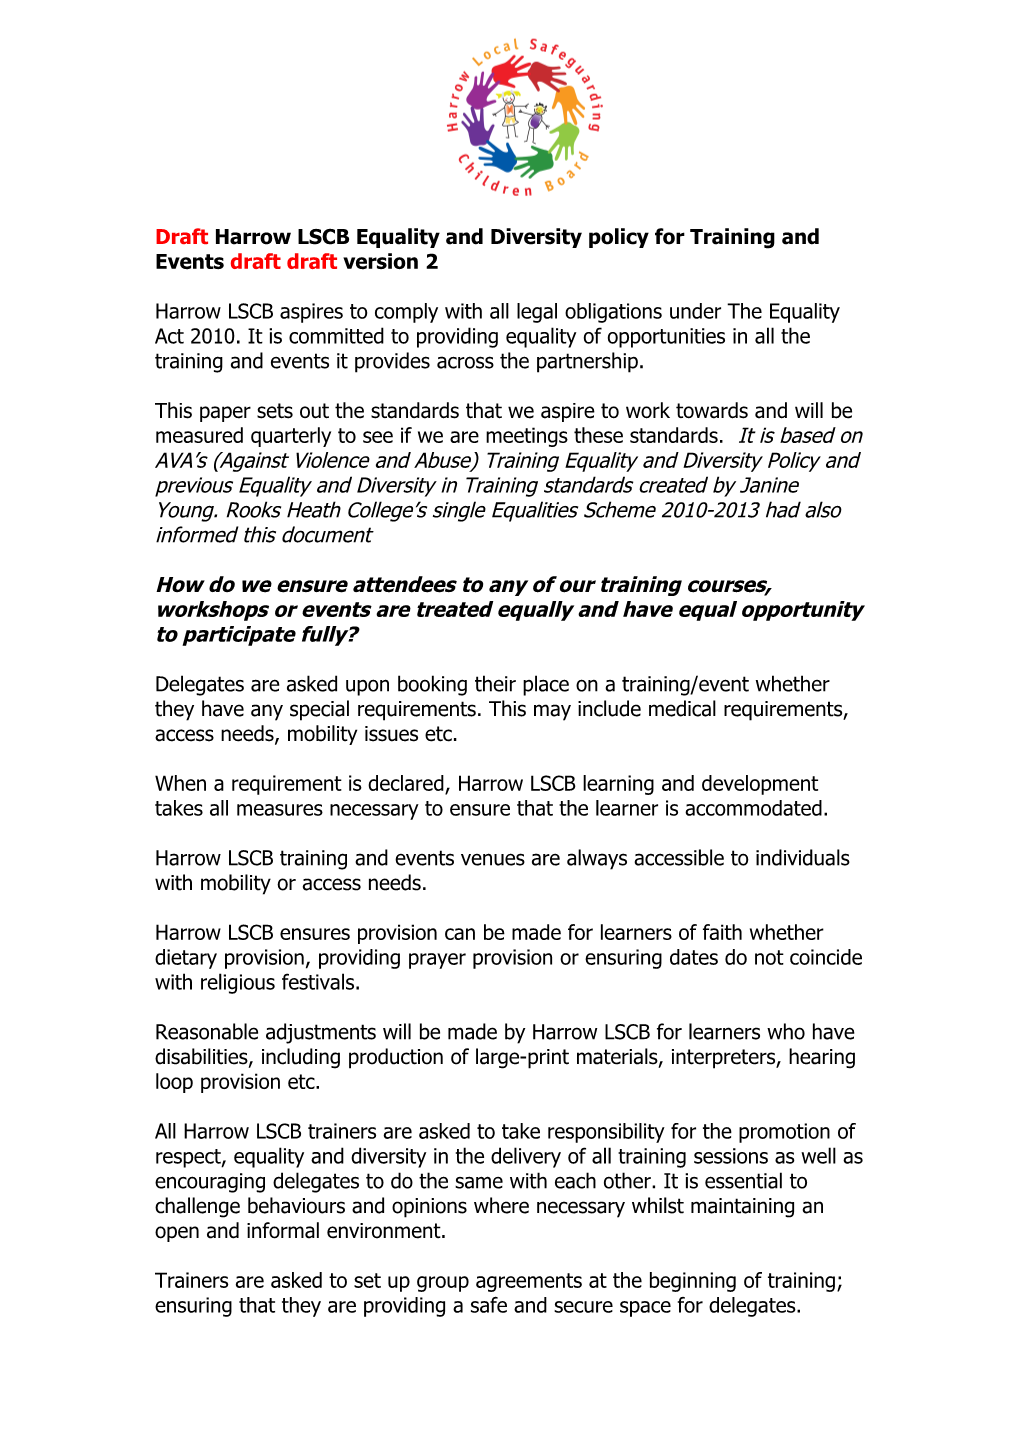 Draft Harrow LSCB Equality and Diversity Policy for Training and Eventsdraft Draftversion 2